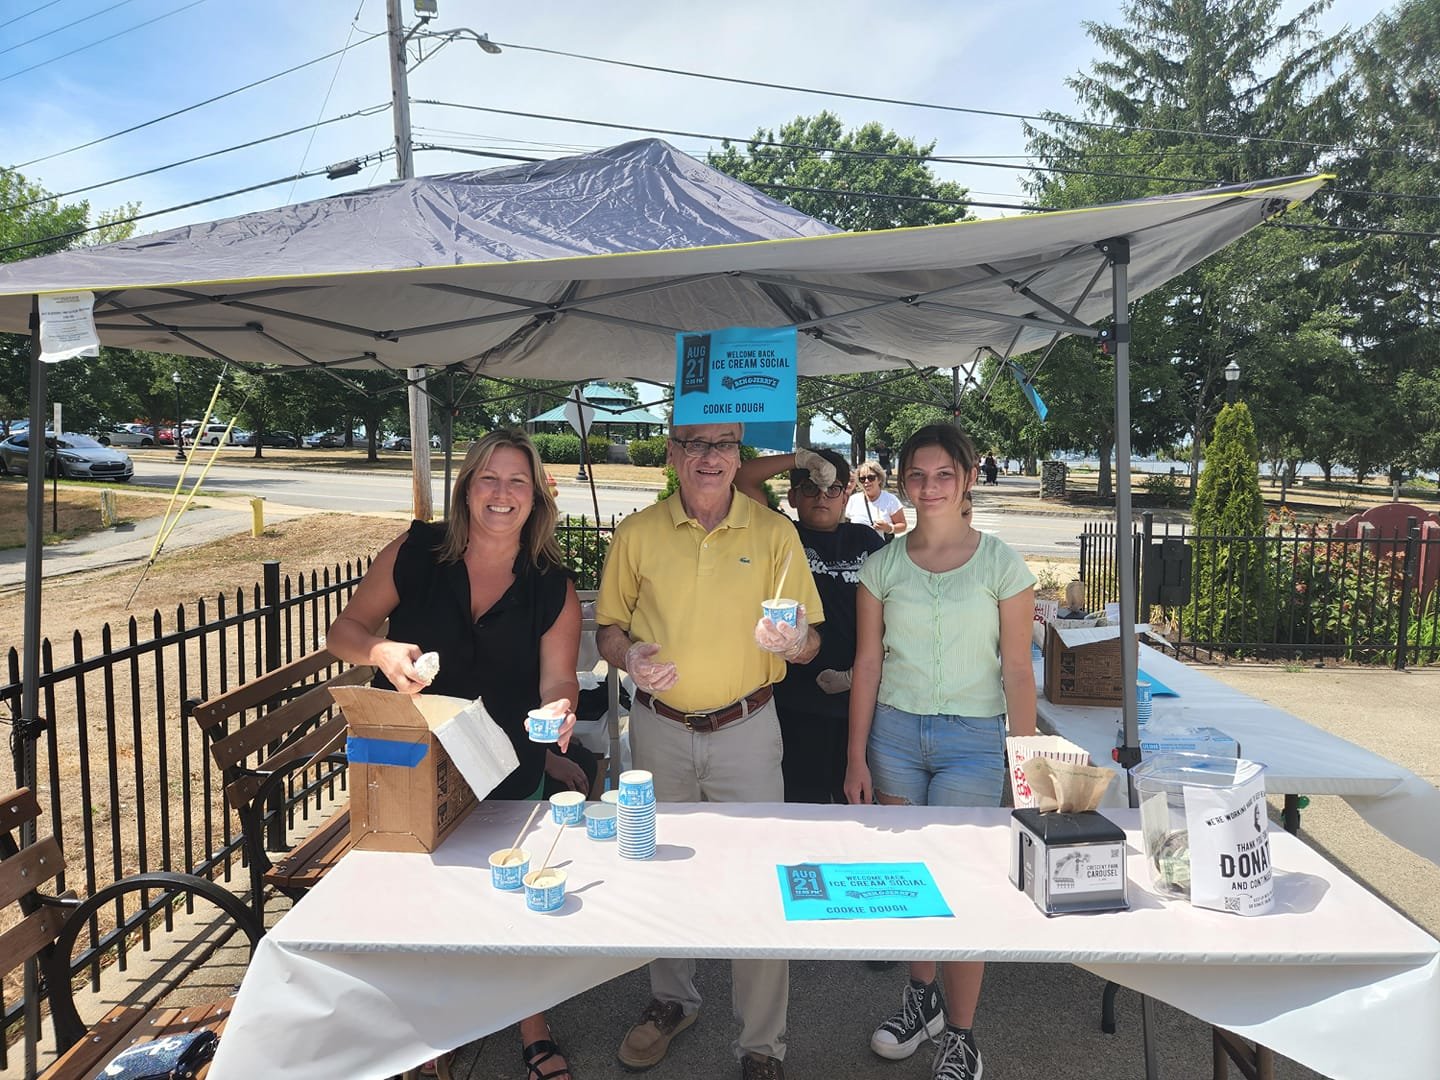 Jessica Beauchaine, Bruce Rogers, Sydney Beauchaine and other volunteers gave free ice cream to over 300 people at the recently opened Crescent Park Carousel in late August.